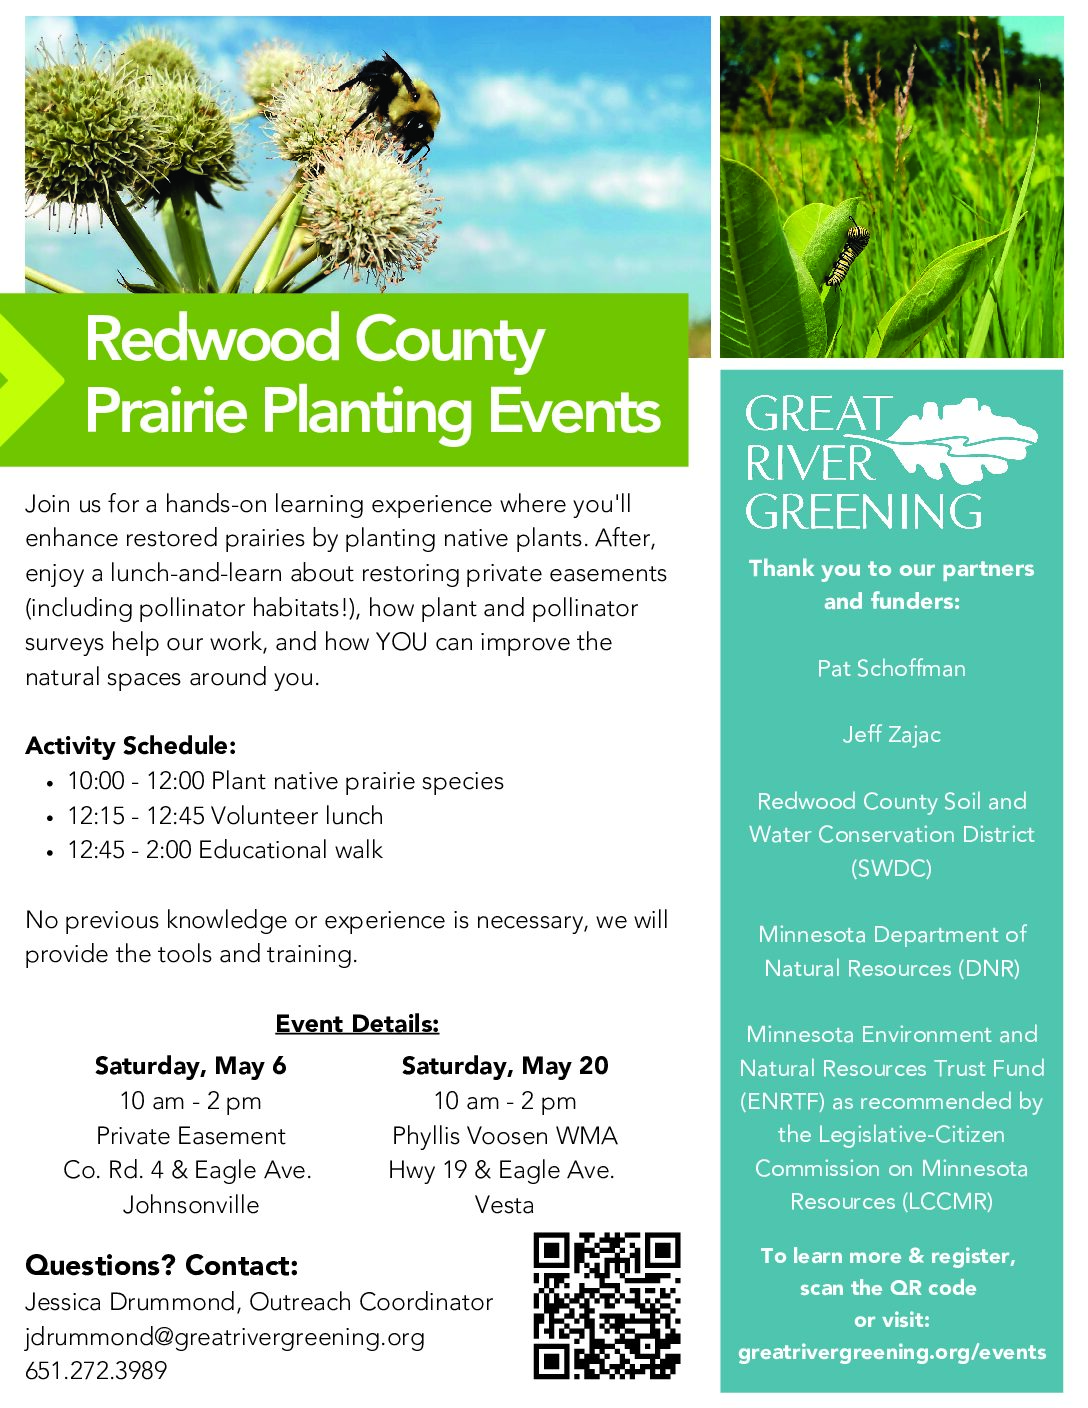 <h1 class="tribe-events-single-event-title">Volunteer Lunch and Learn in Redwood County with Great River Greening</h1>